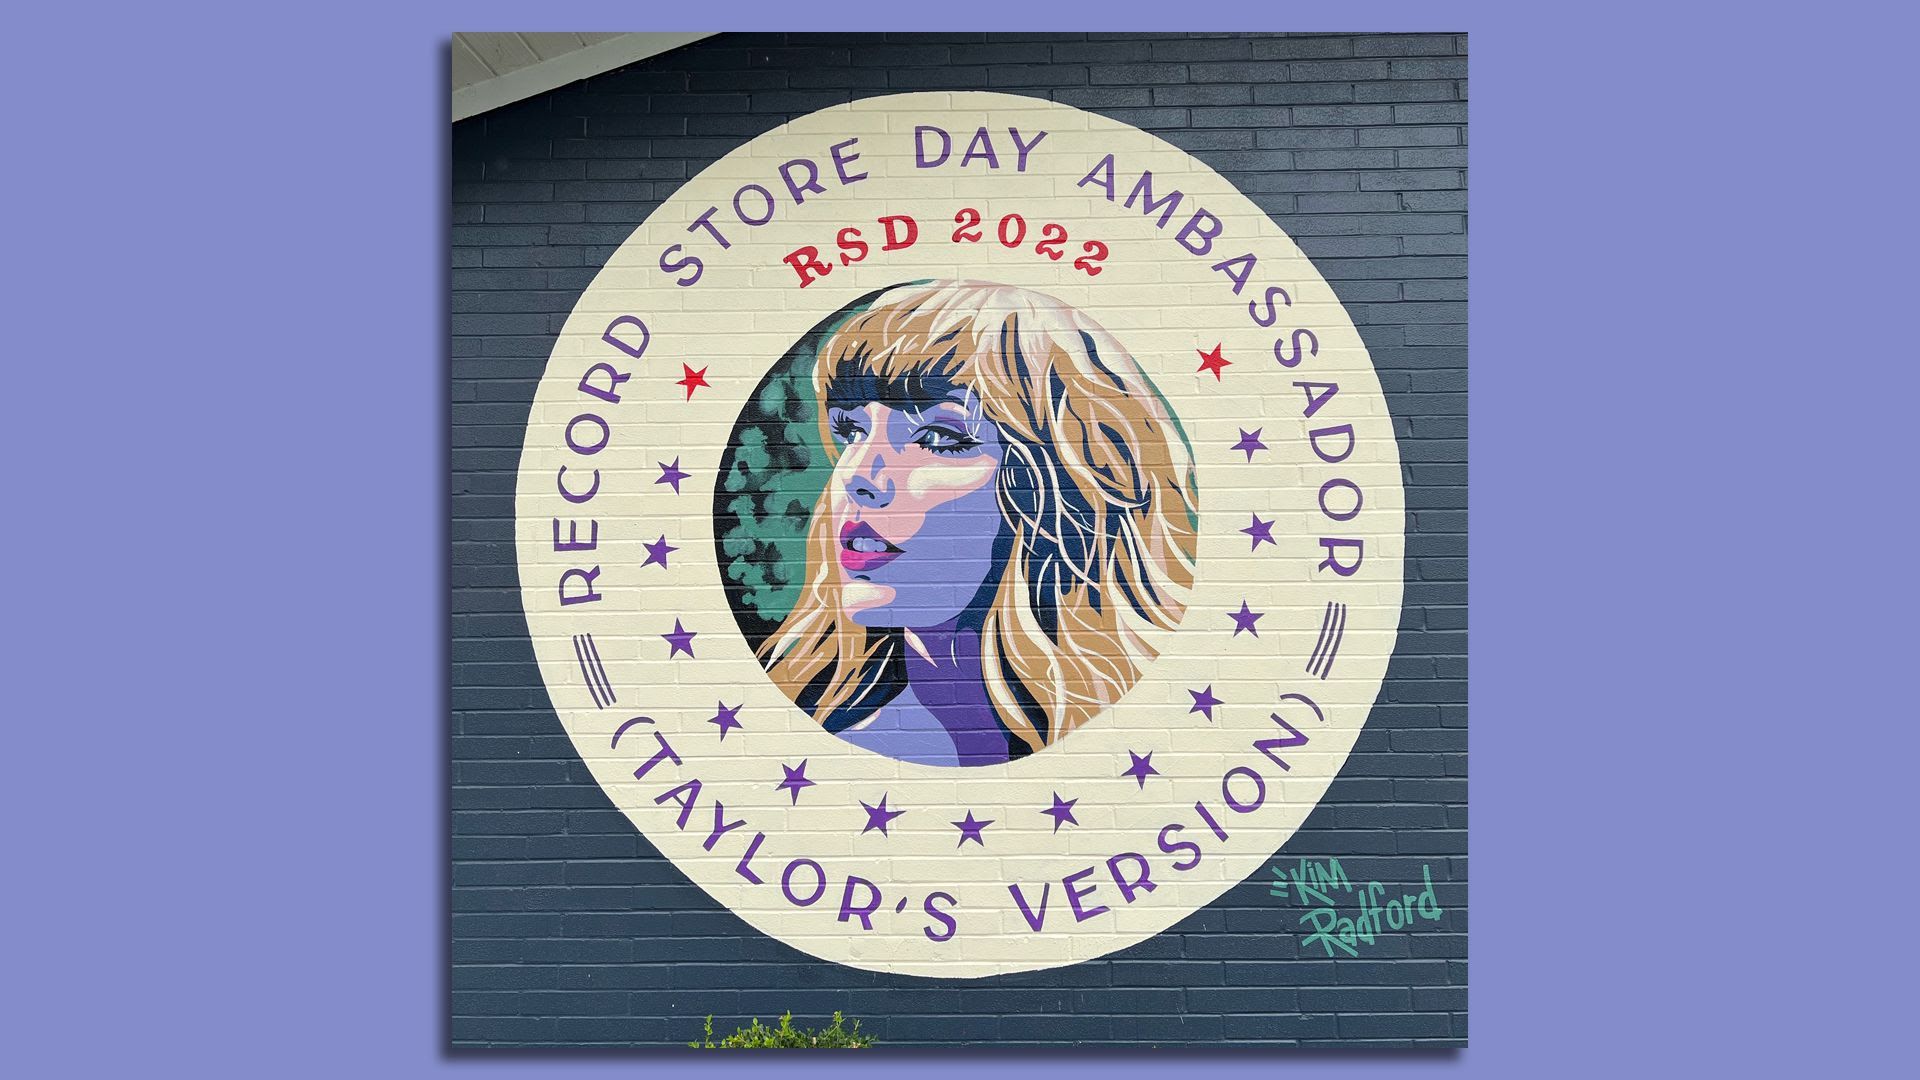 The Taylor Swift mural on the side of Grimey's.